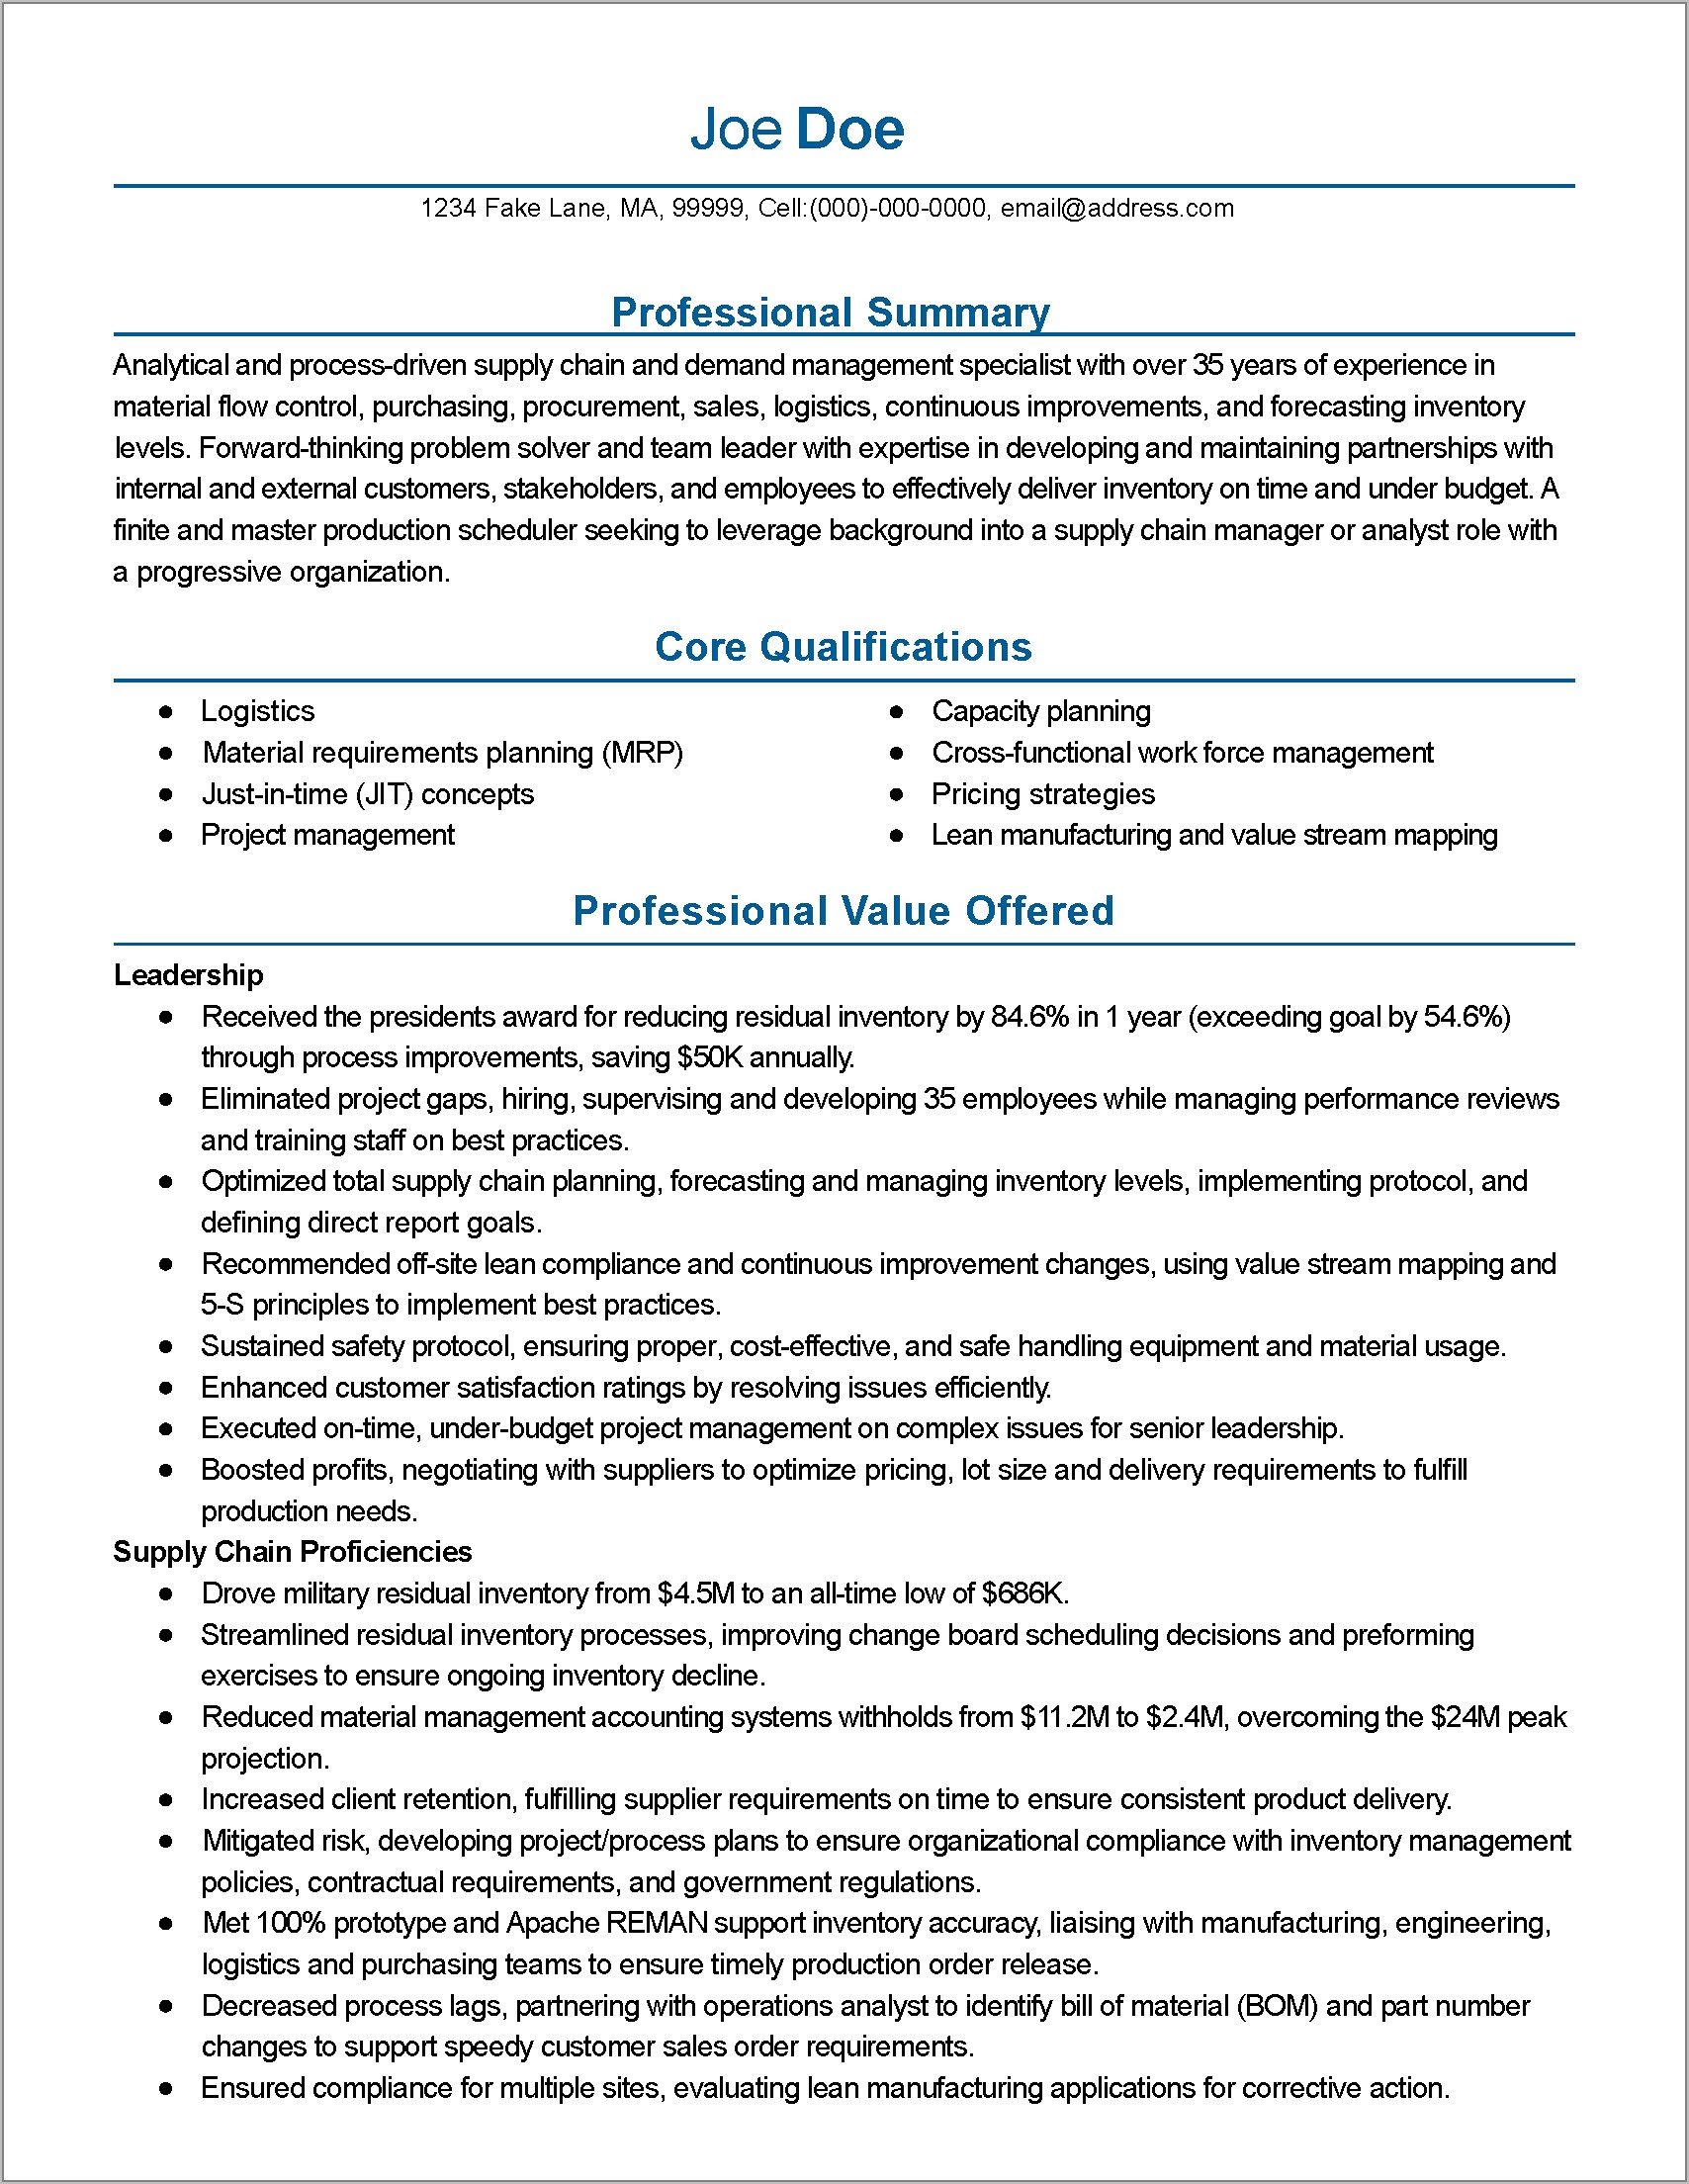 Resume Format For Scm Executive